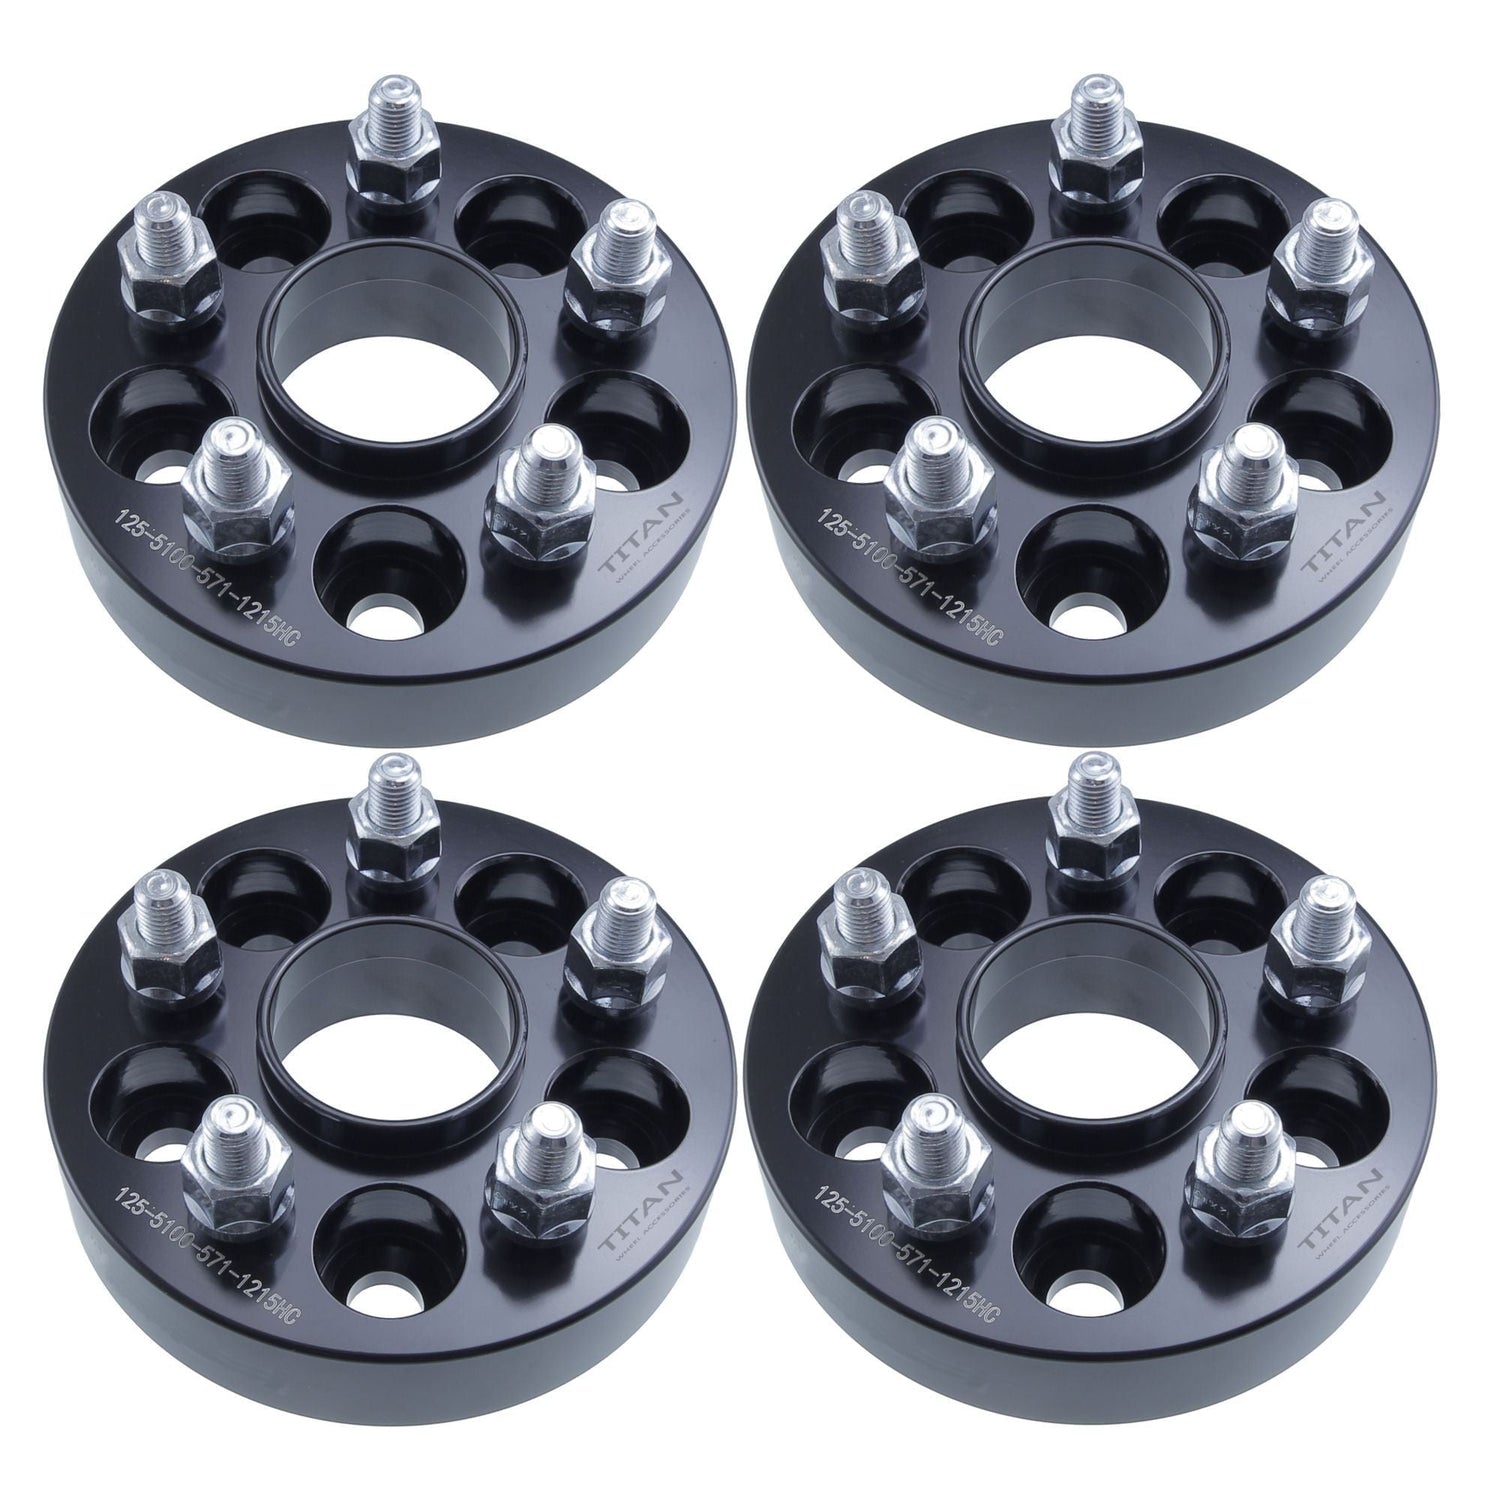 25mm Hubcentric Wheel Spacers for VW Golf Jetta Audi TT | 5x100